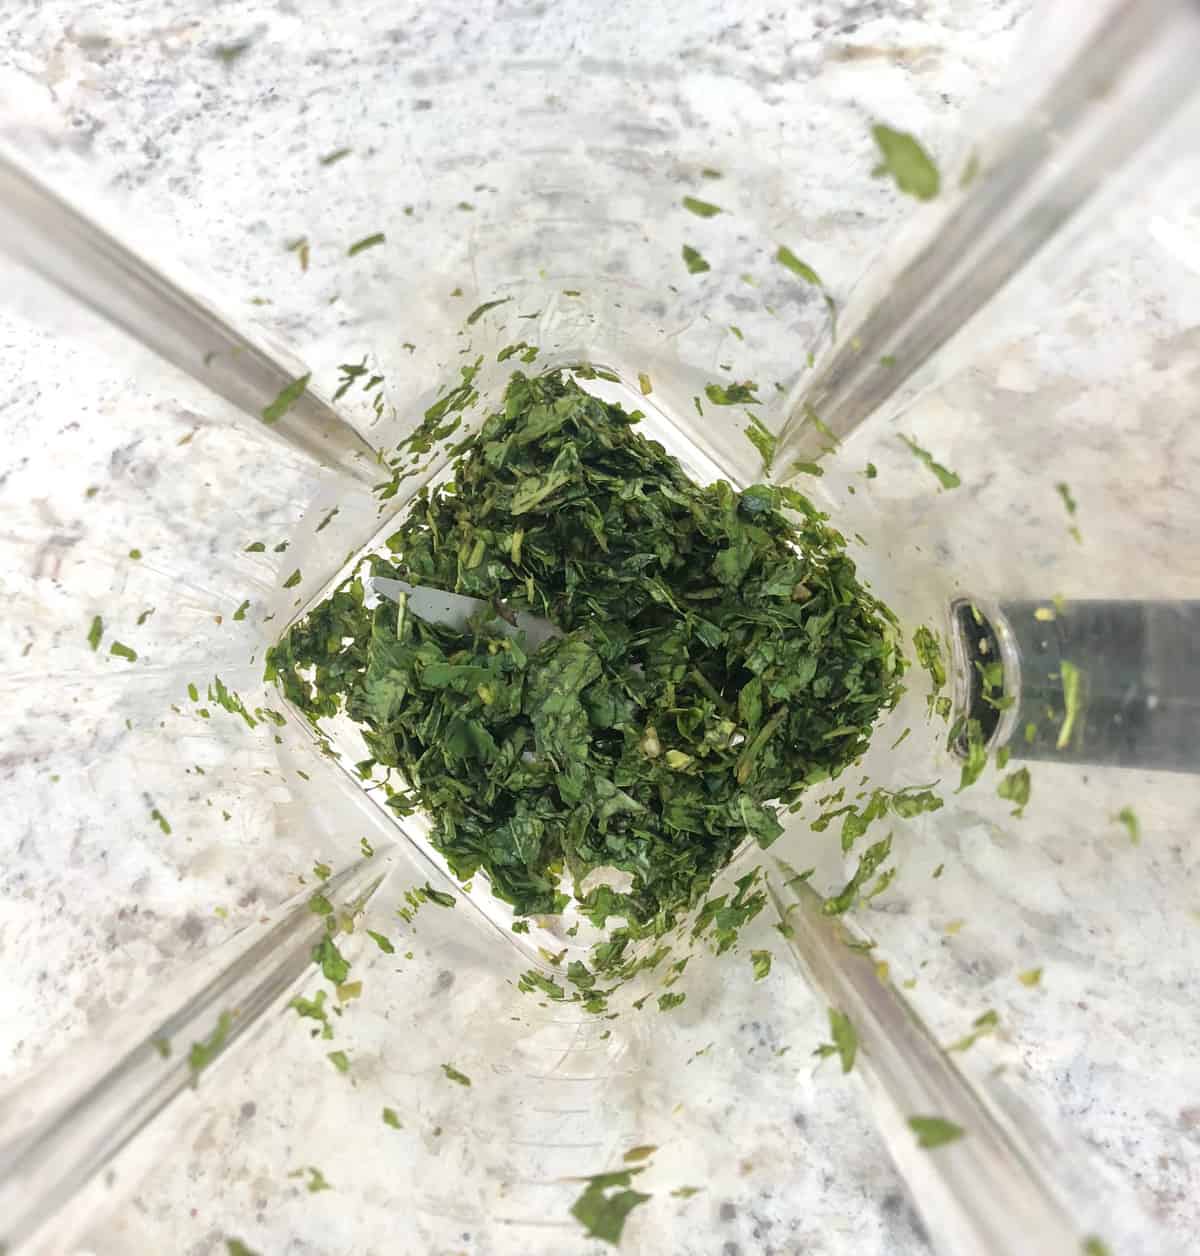 Throw the basil into a blender, stems and all, and chop fine.